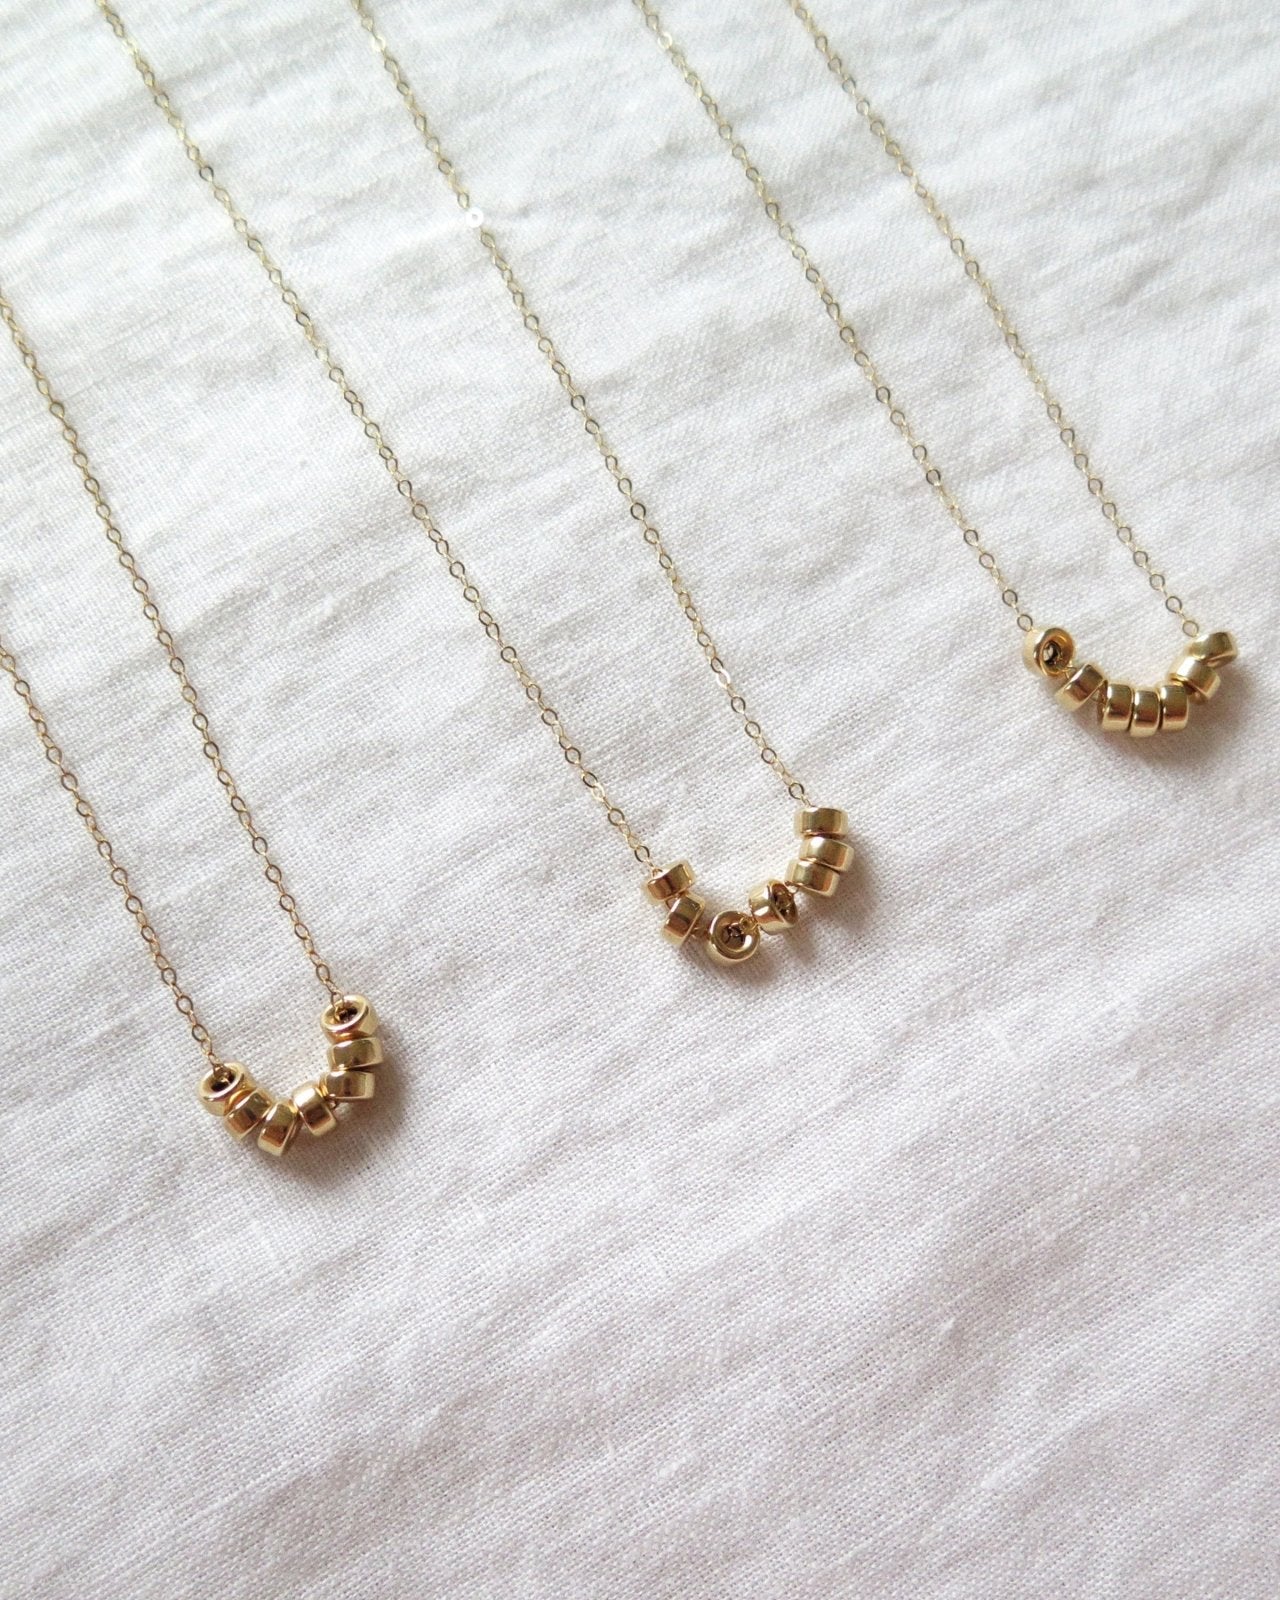 SEVEN RING NECKLACE- 14k Yellow Gold - The Littl - Deluxe Chain - 39cm